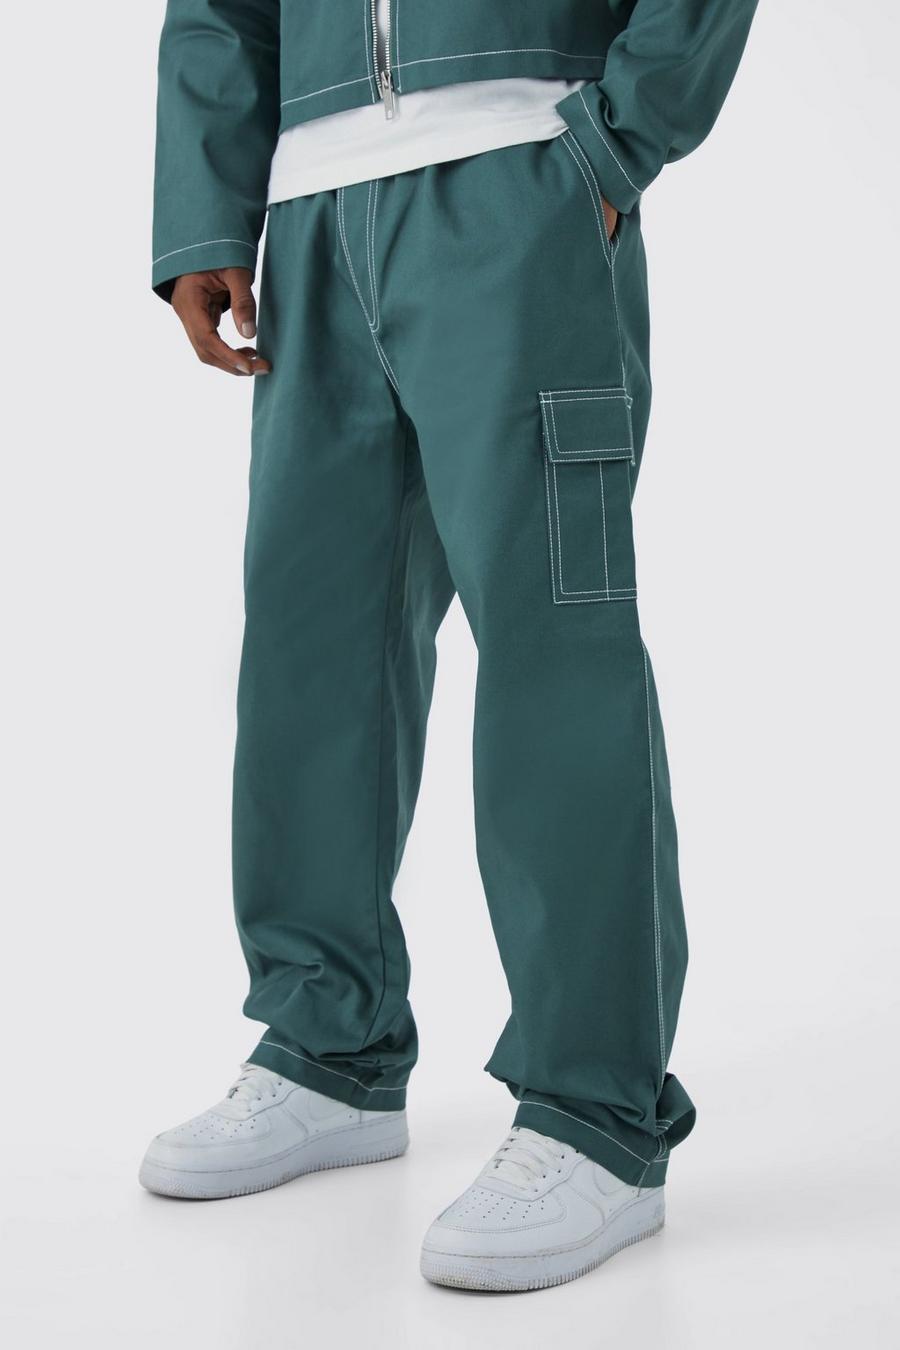 Green Elasticated Waistband Twill Contrast Stitch Relaxed Cargo